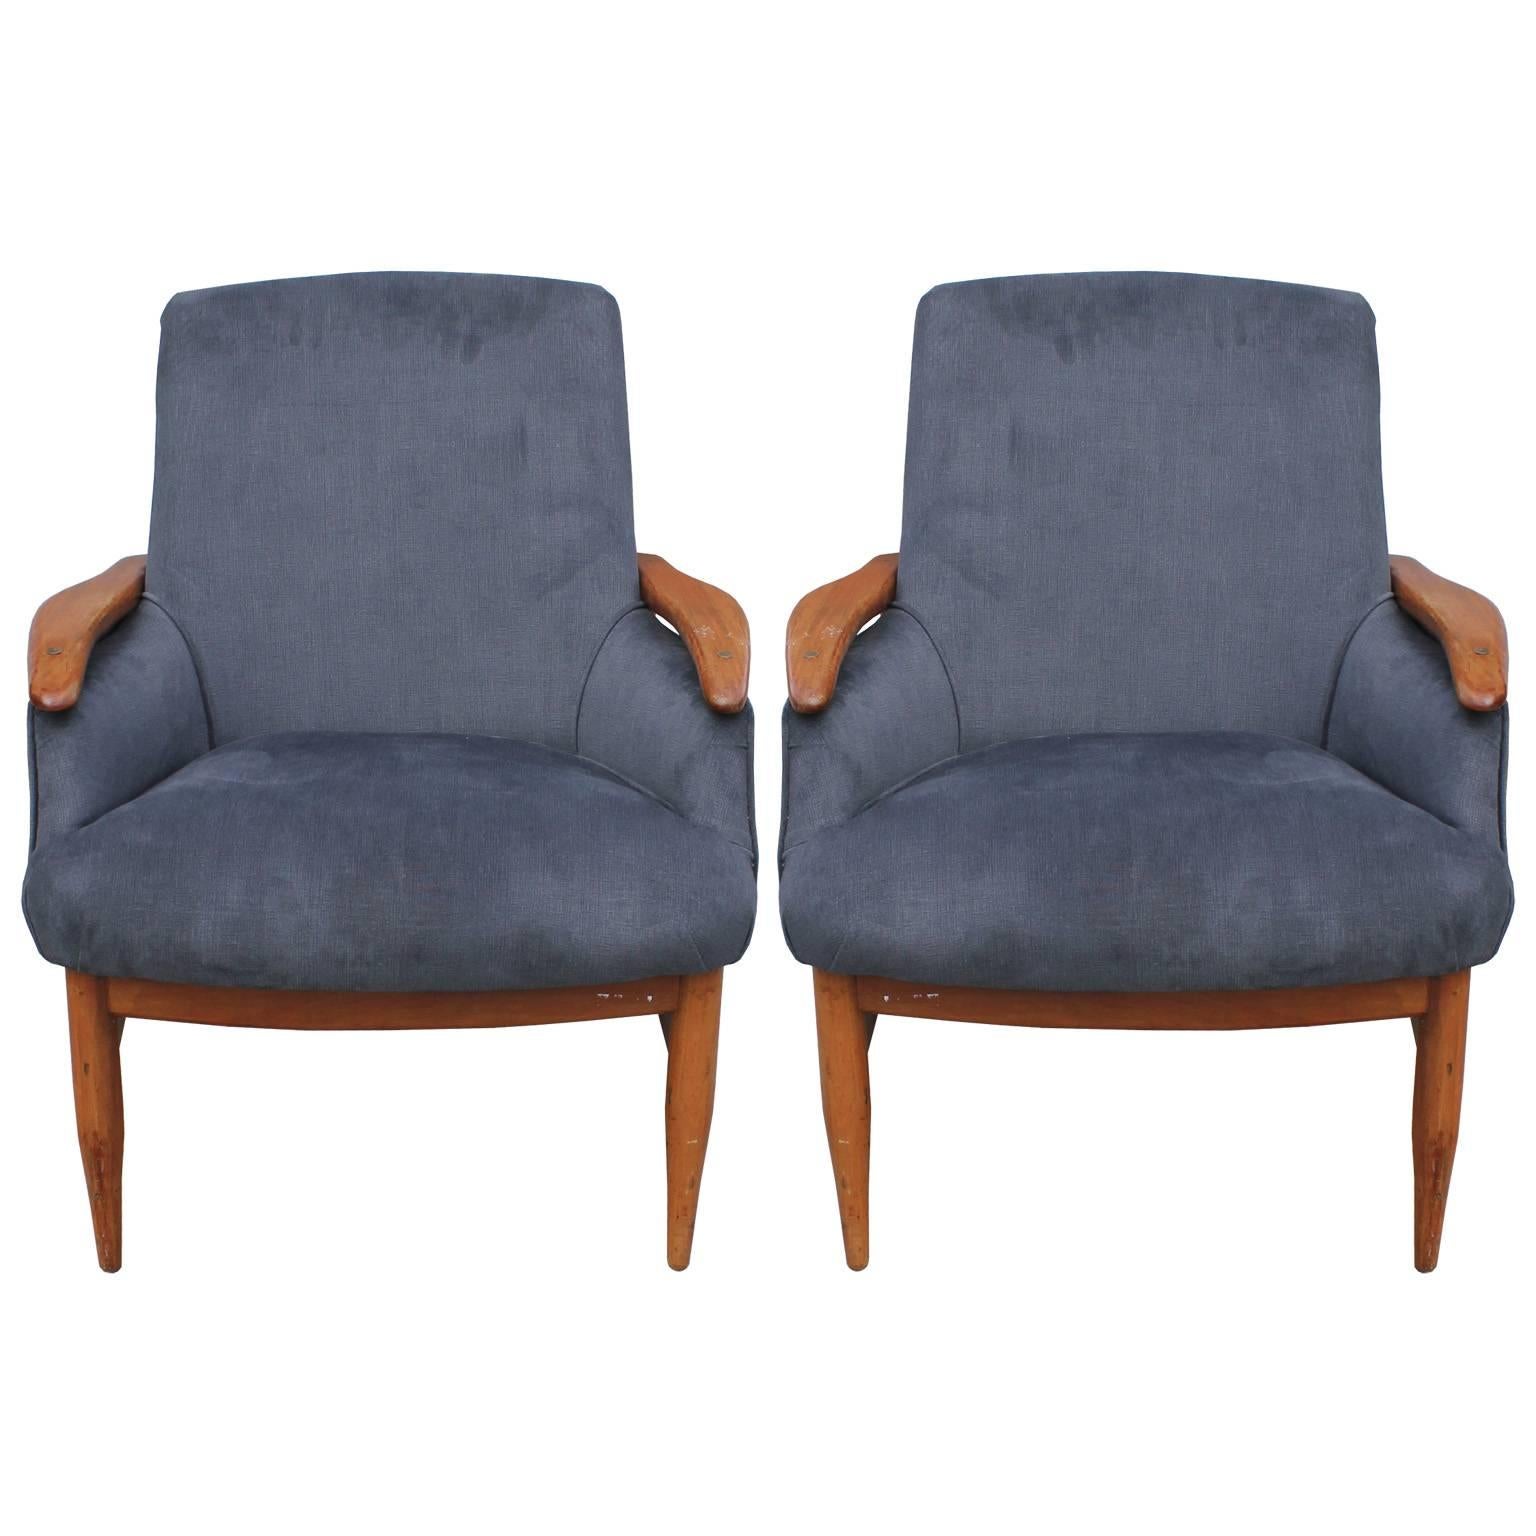 Excellent pair of lounge chairs. Chairs feature sculptural teak bases with lots of negative space. Upholstered in a luxe grey velvet recently. The frames are in nice vintage condition.
   